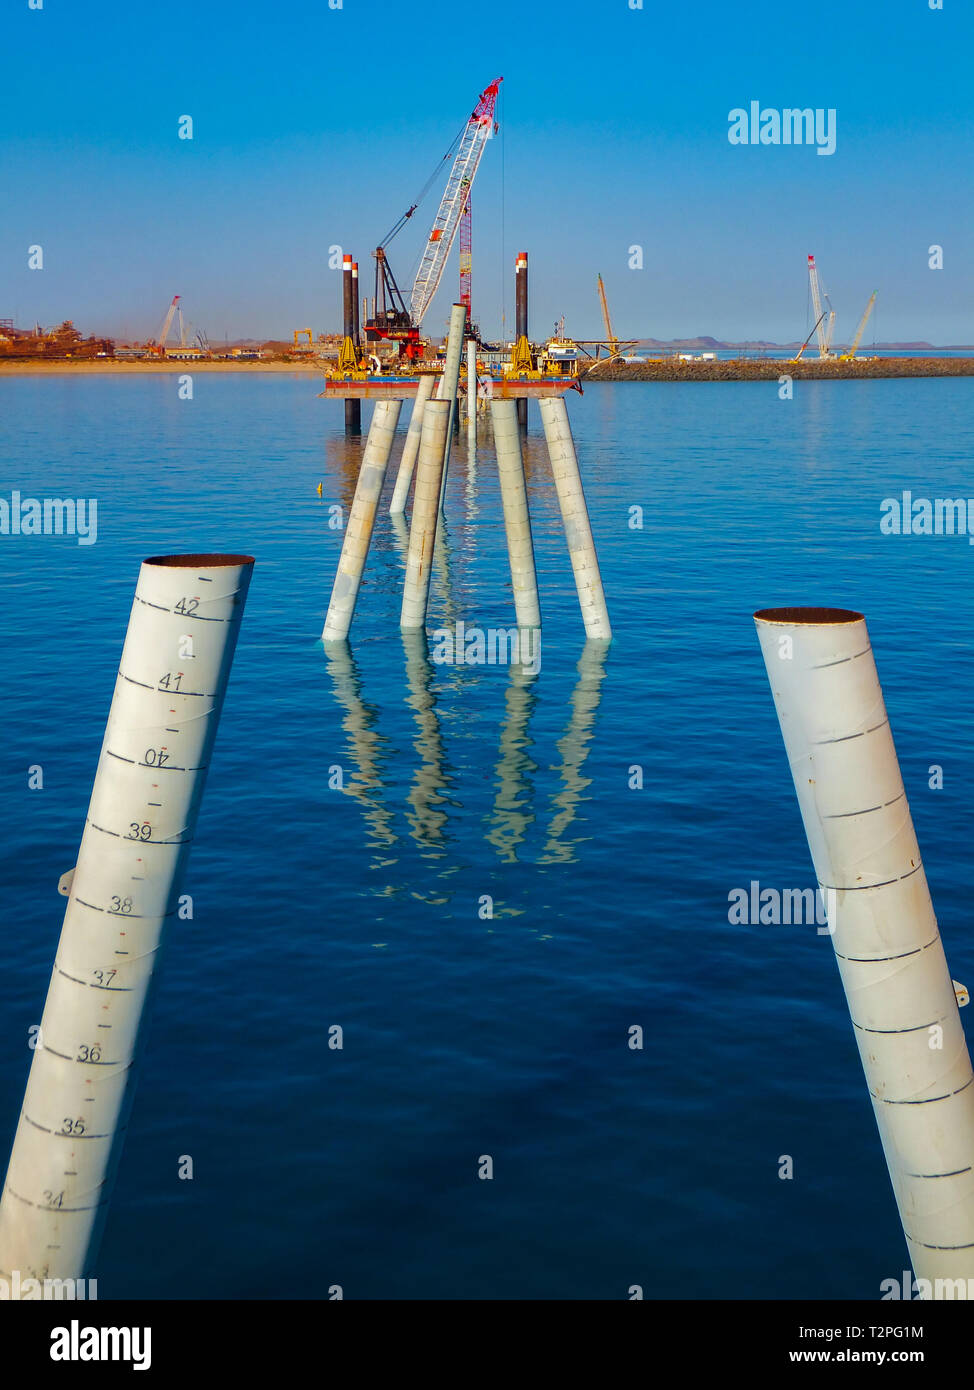 The construction of a wharf in full flow with raked piles in place ready for headstocks Stock Photo